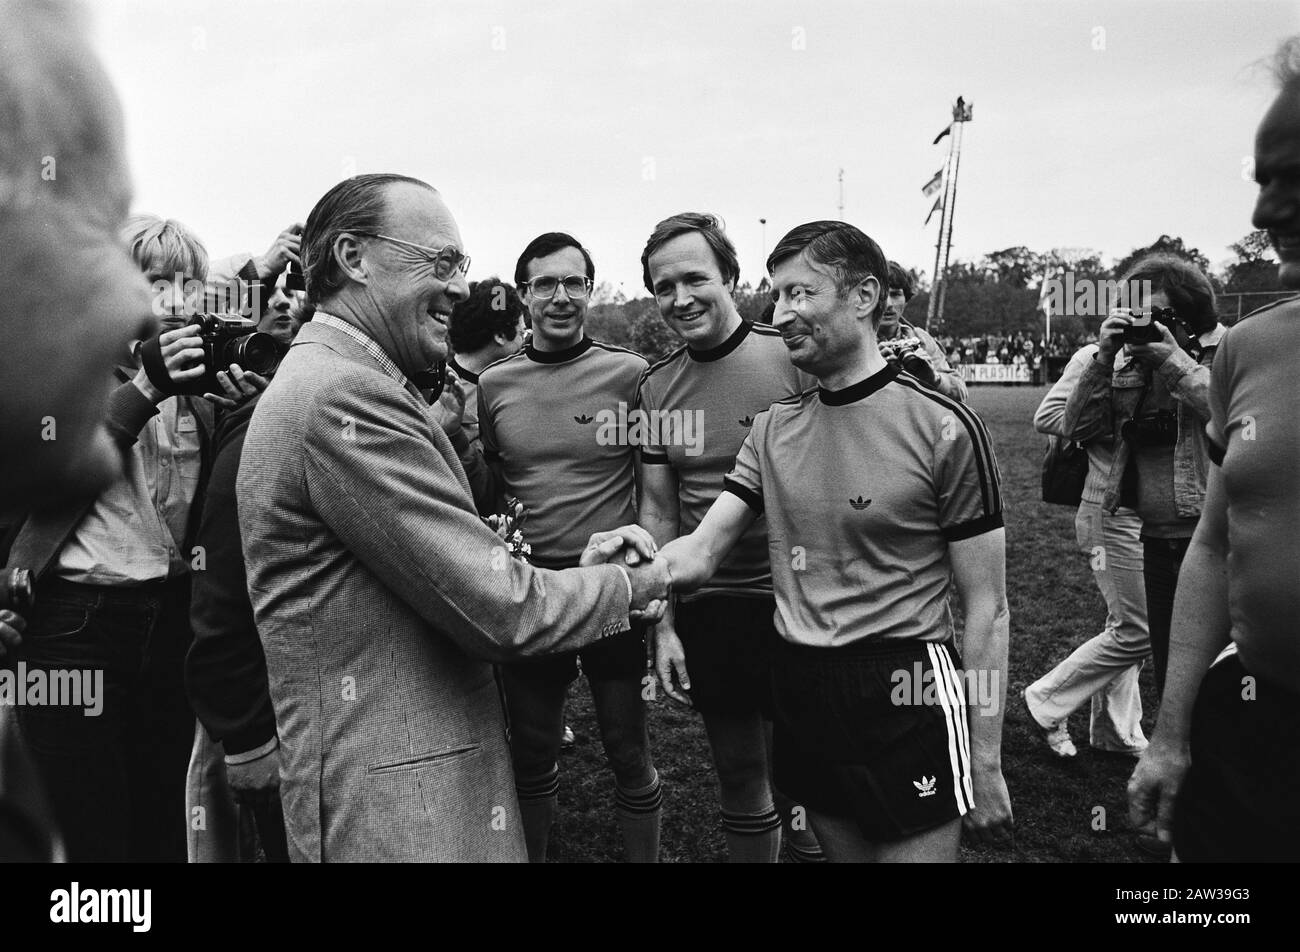 Boerhaave Soccer Tournament behalf of the National Fund Sports Disabled  Prince Bernhard van Agt (CDA), Brinkhorst (D66) and Terlouw (D66) Date: May 26, 1979 Location: Leiden, South -Holland Keywords: professors, prime ministers, politicians, princes, football Person Name: Agt, Dries van, Bernhard (prince Netherlands), Brinkhorst, Laurens, Terlouw, Jan Stock Photo